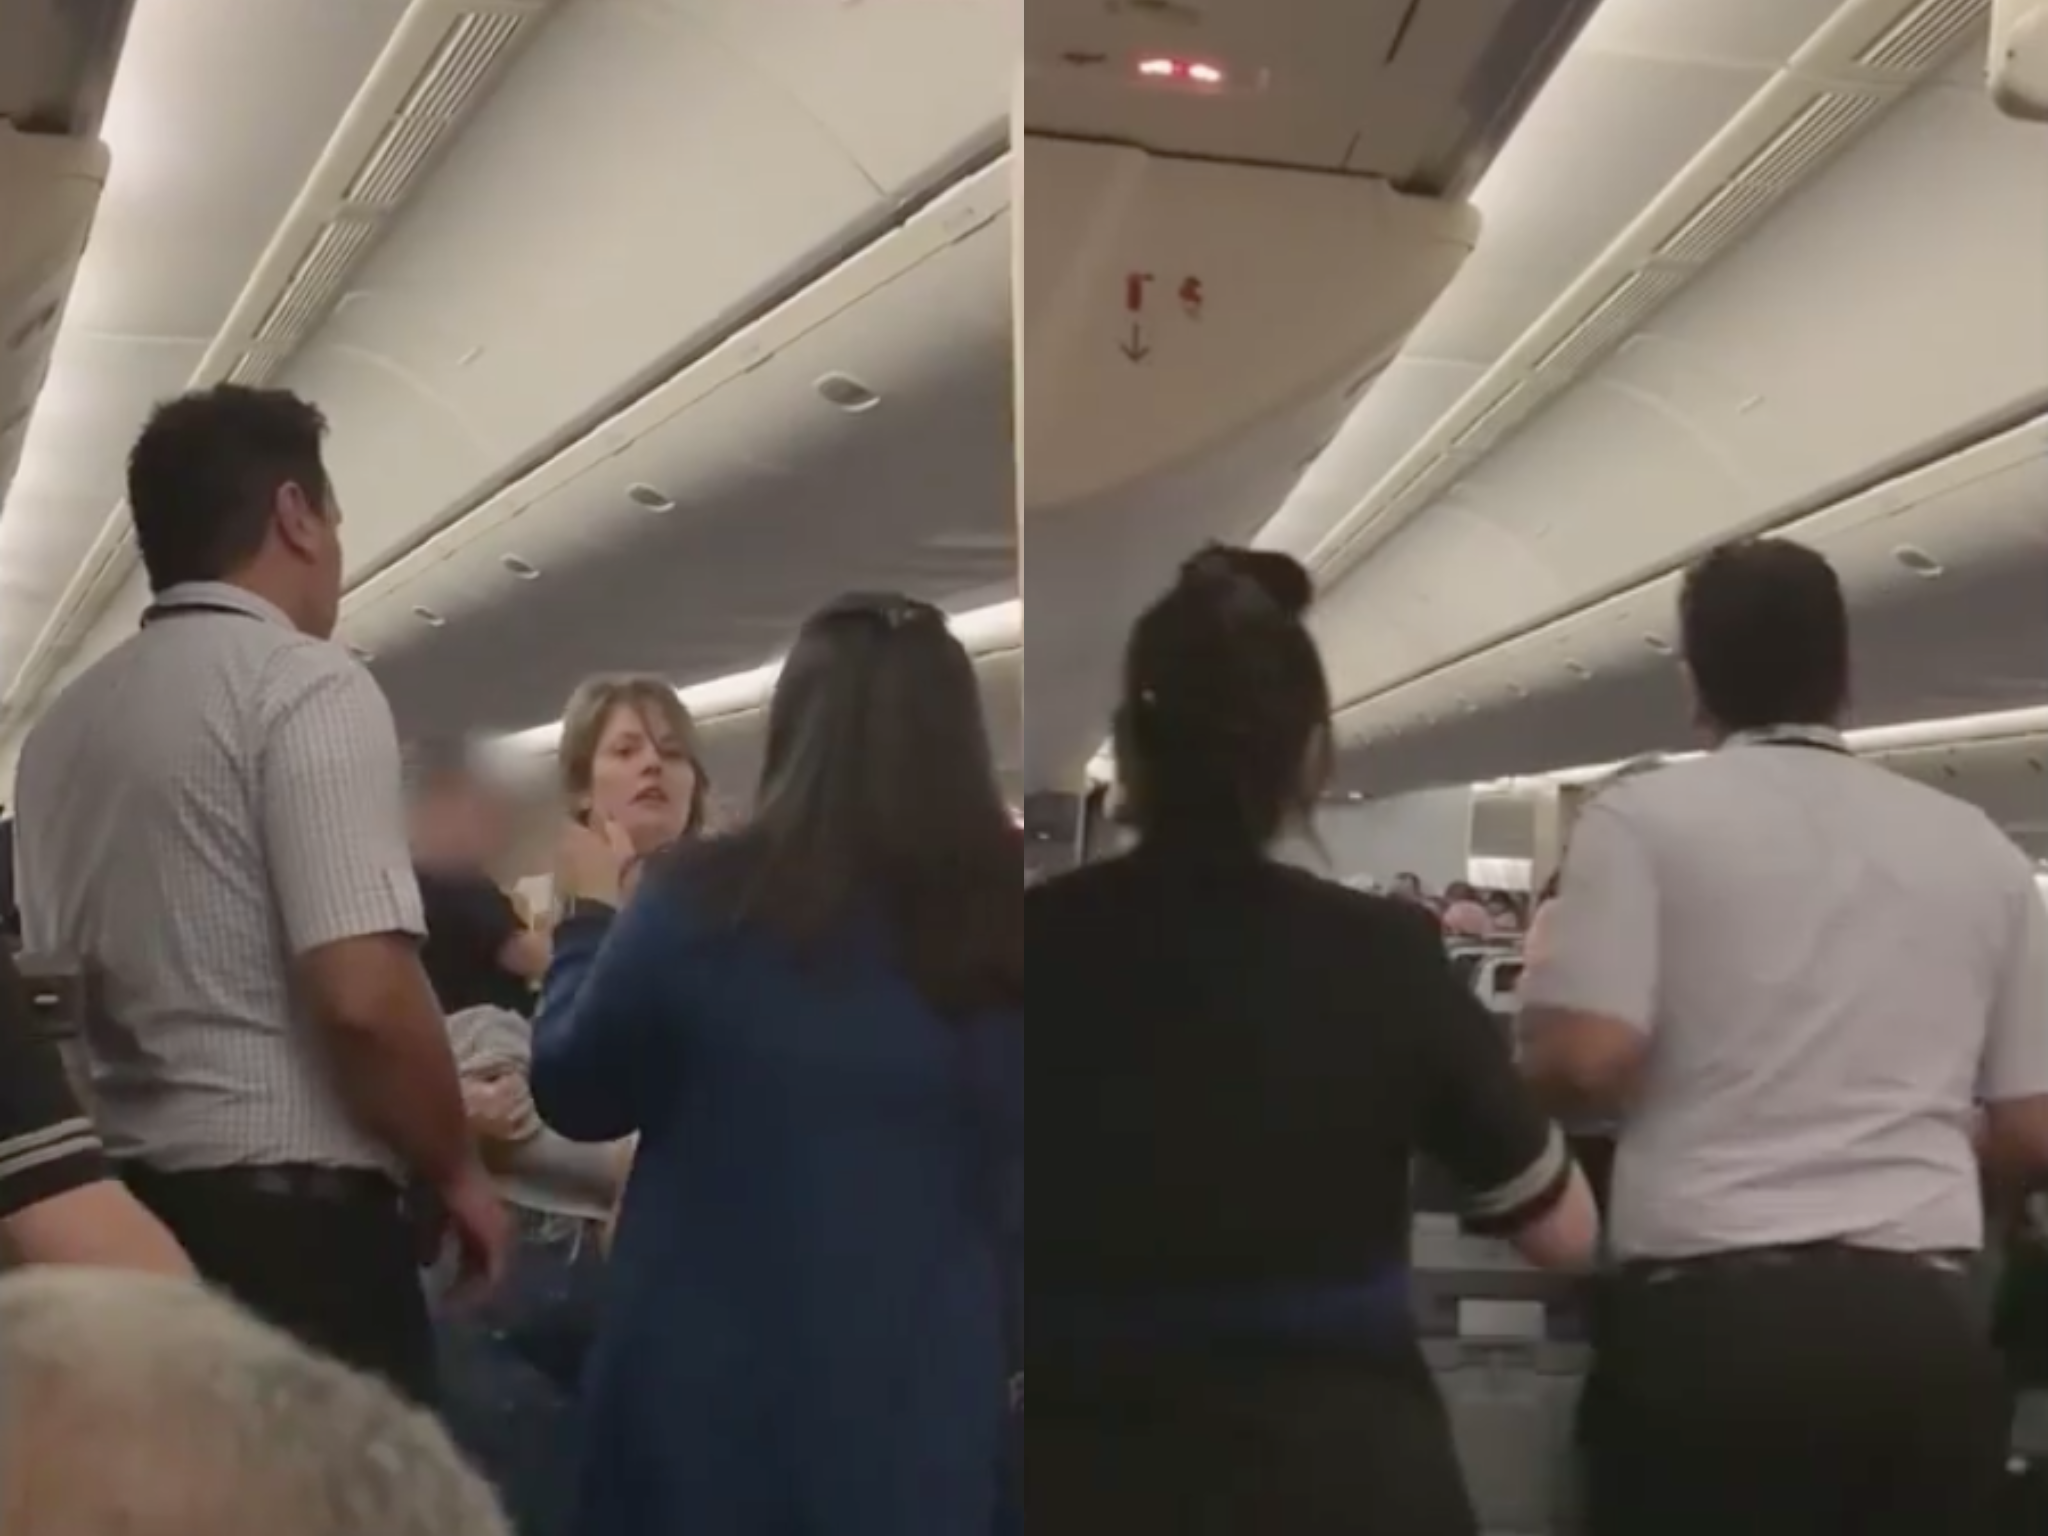 Woman with child removed from flight by police after screaming at crew and shoving flight attendant The Independent pic pic